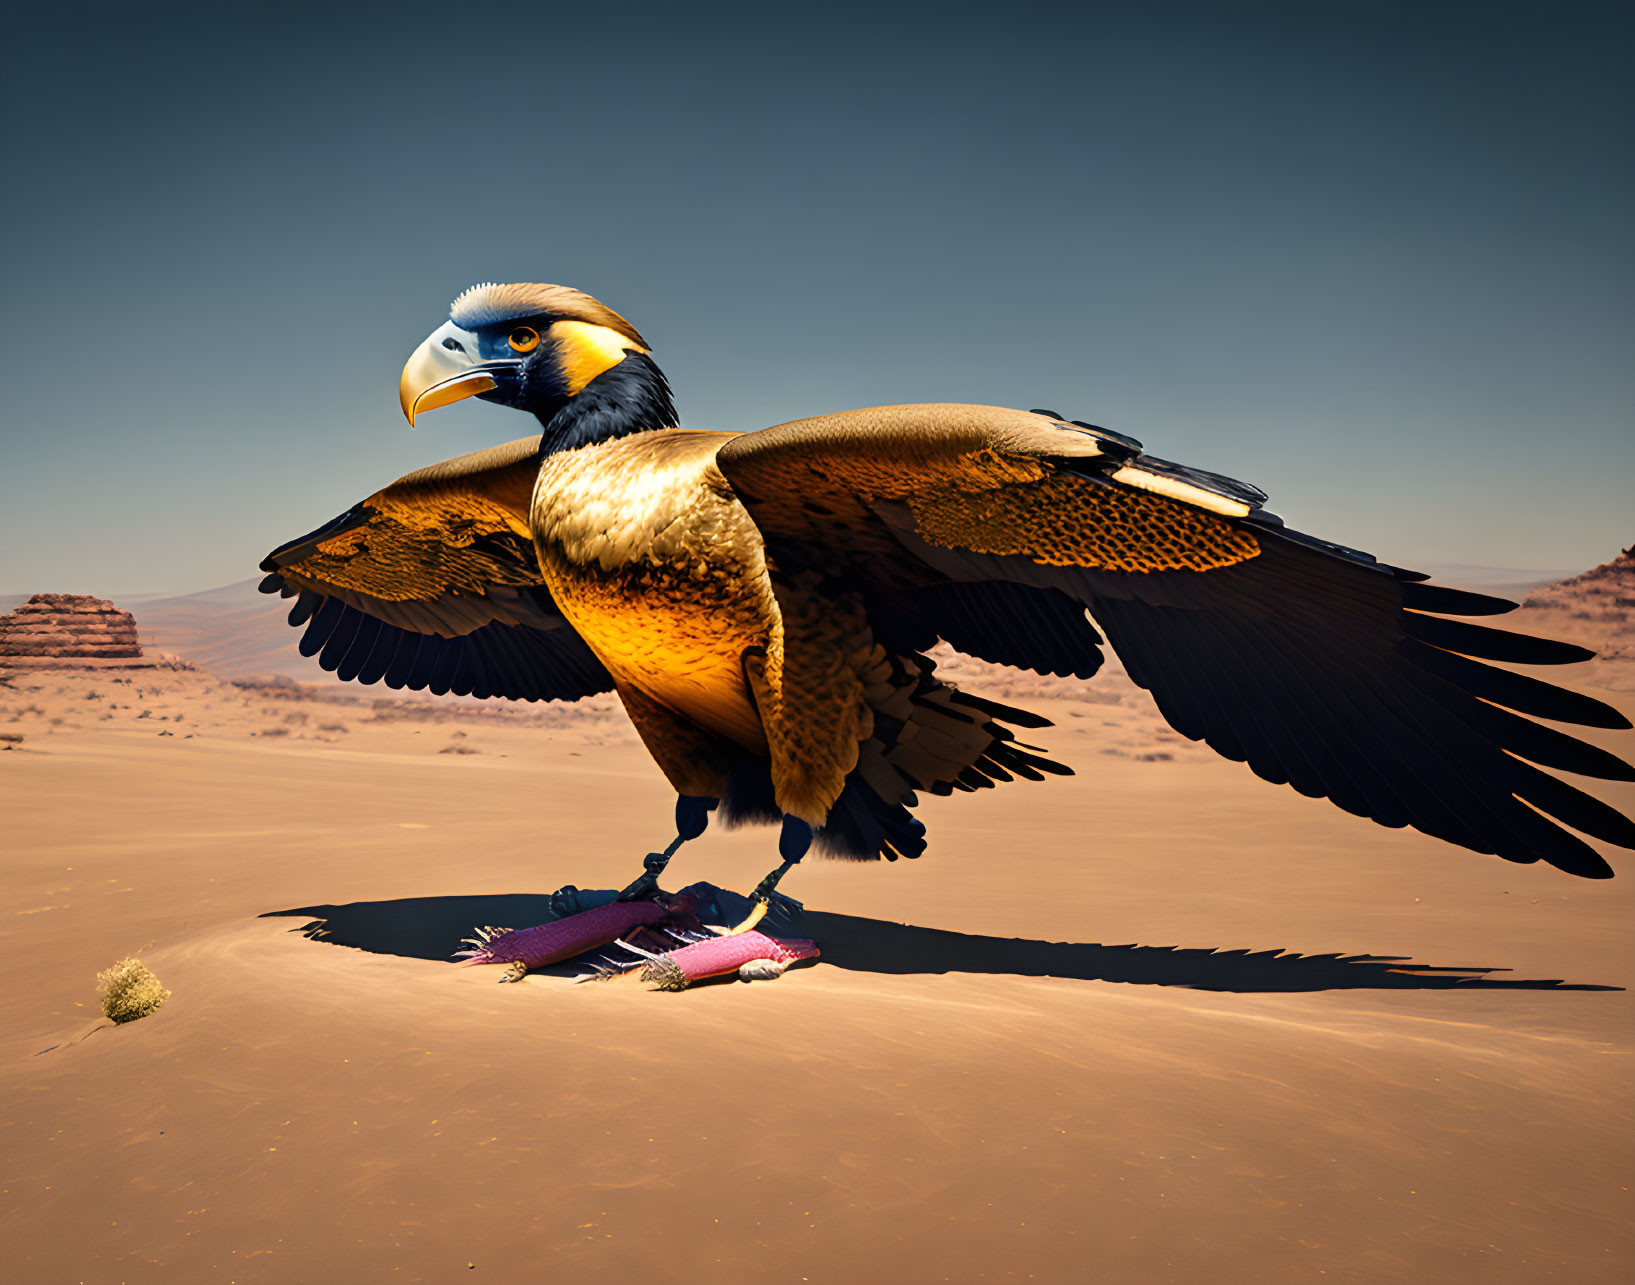 Surreal image: Eagle-bodied bird with mandrill head in desert landscape